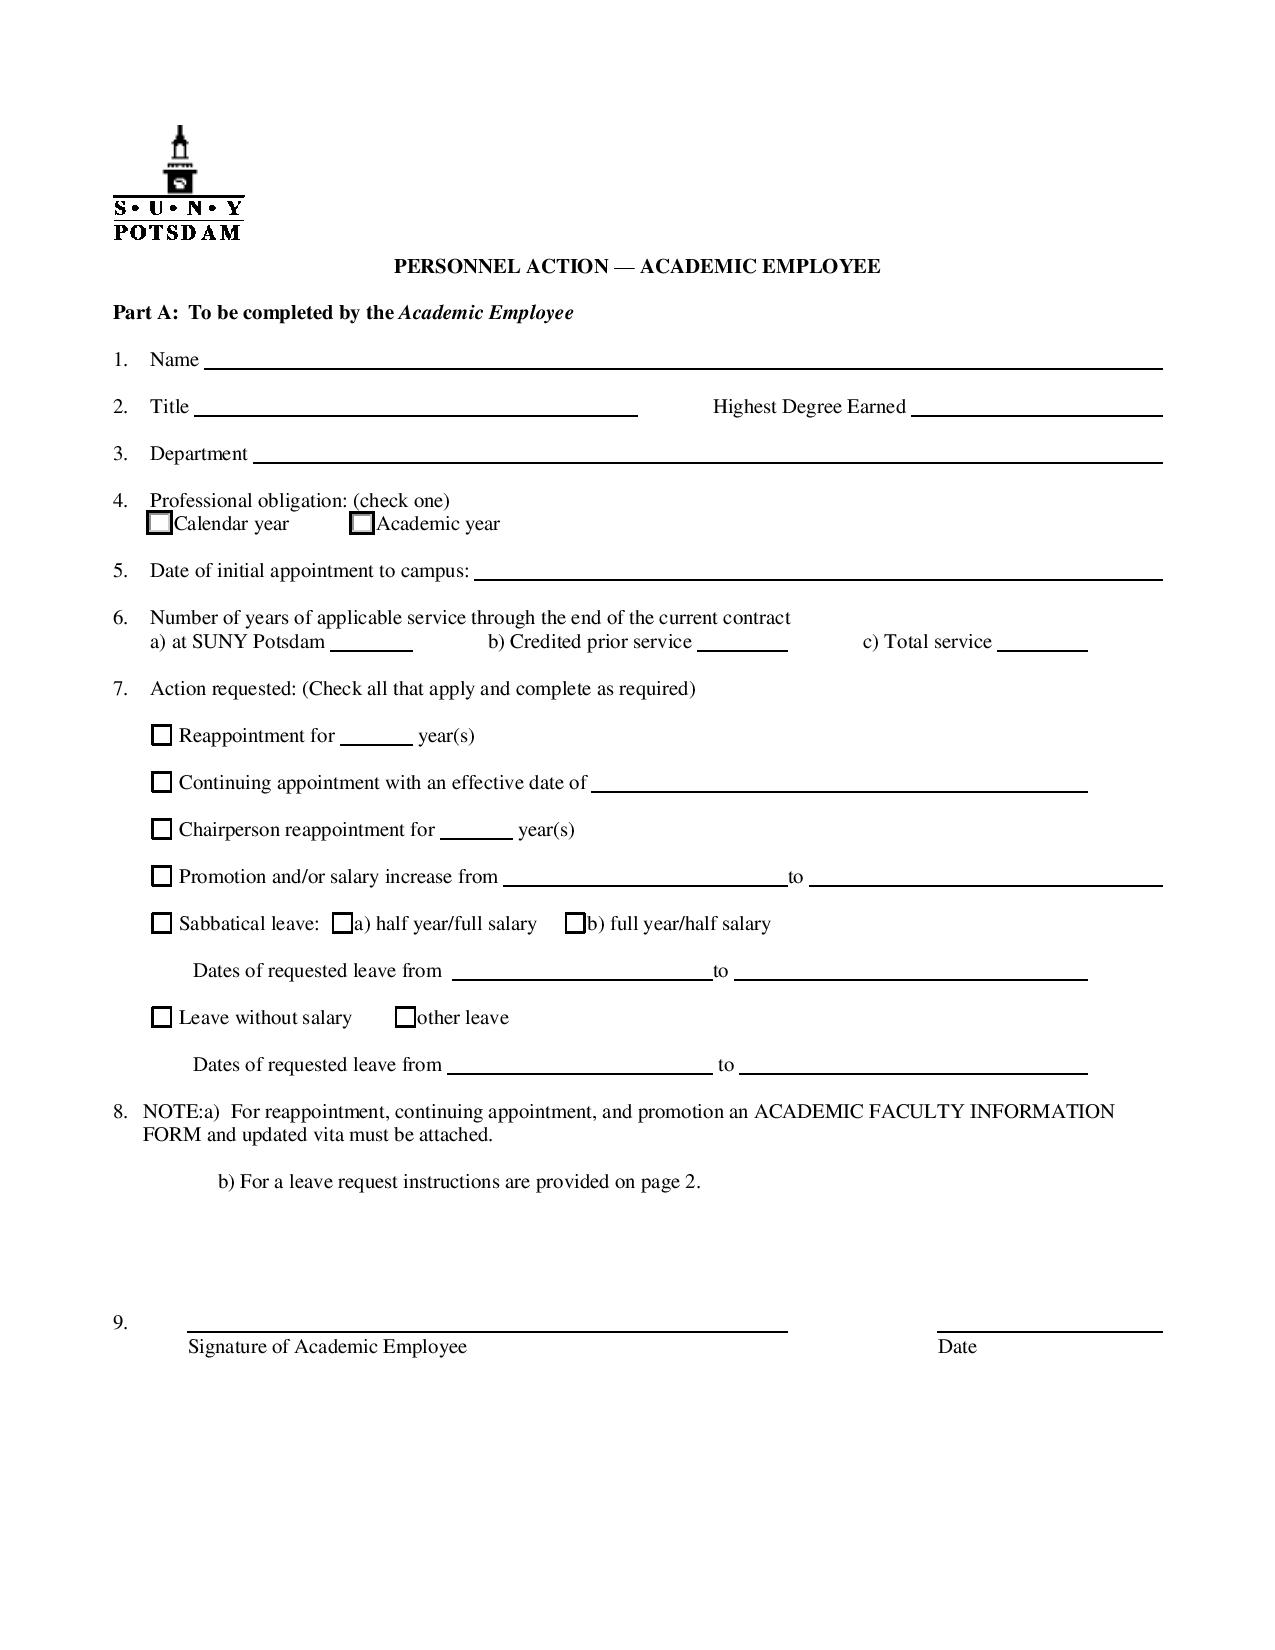 academic employee personnel action form page 001